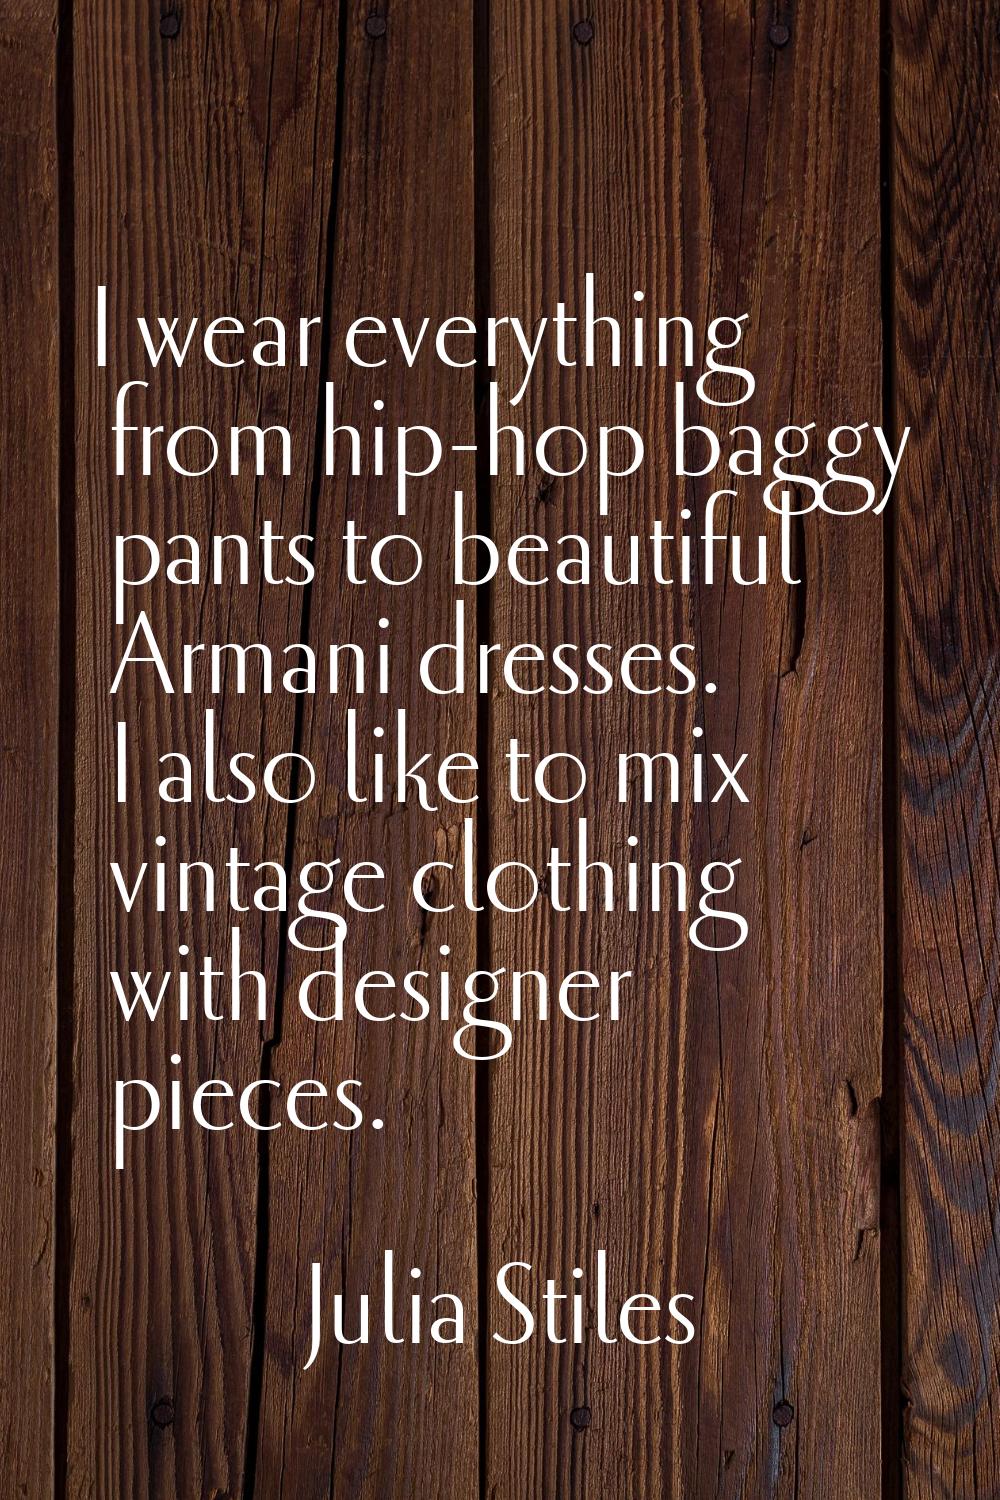 I wear everything from hip-hop baggy pants to beautiful Armani dresses. I also like to mix vintage 